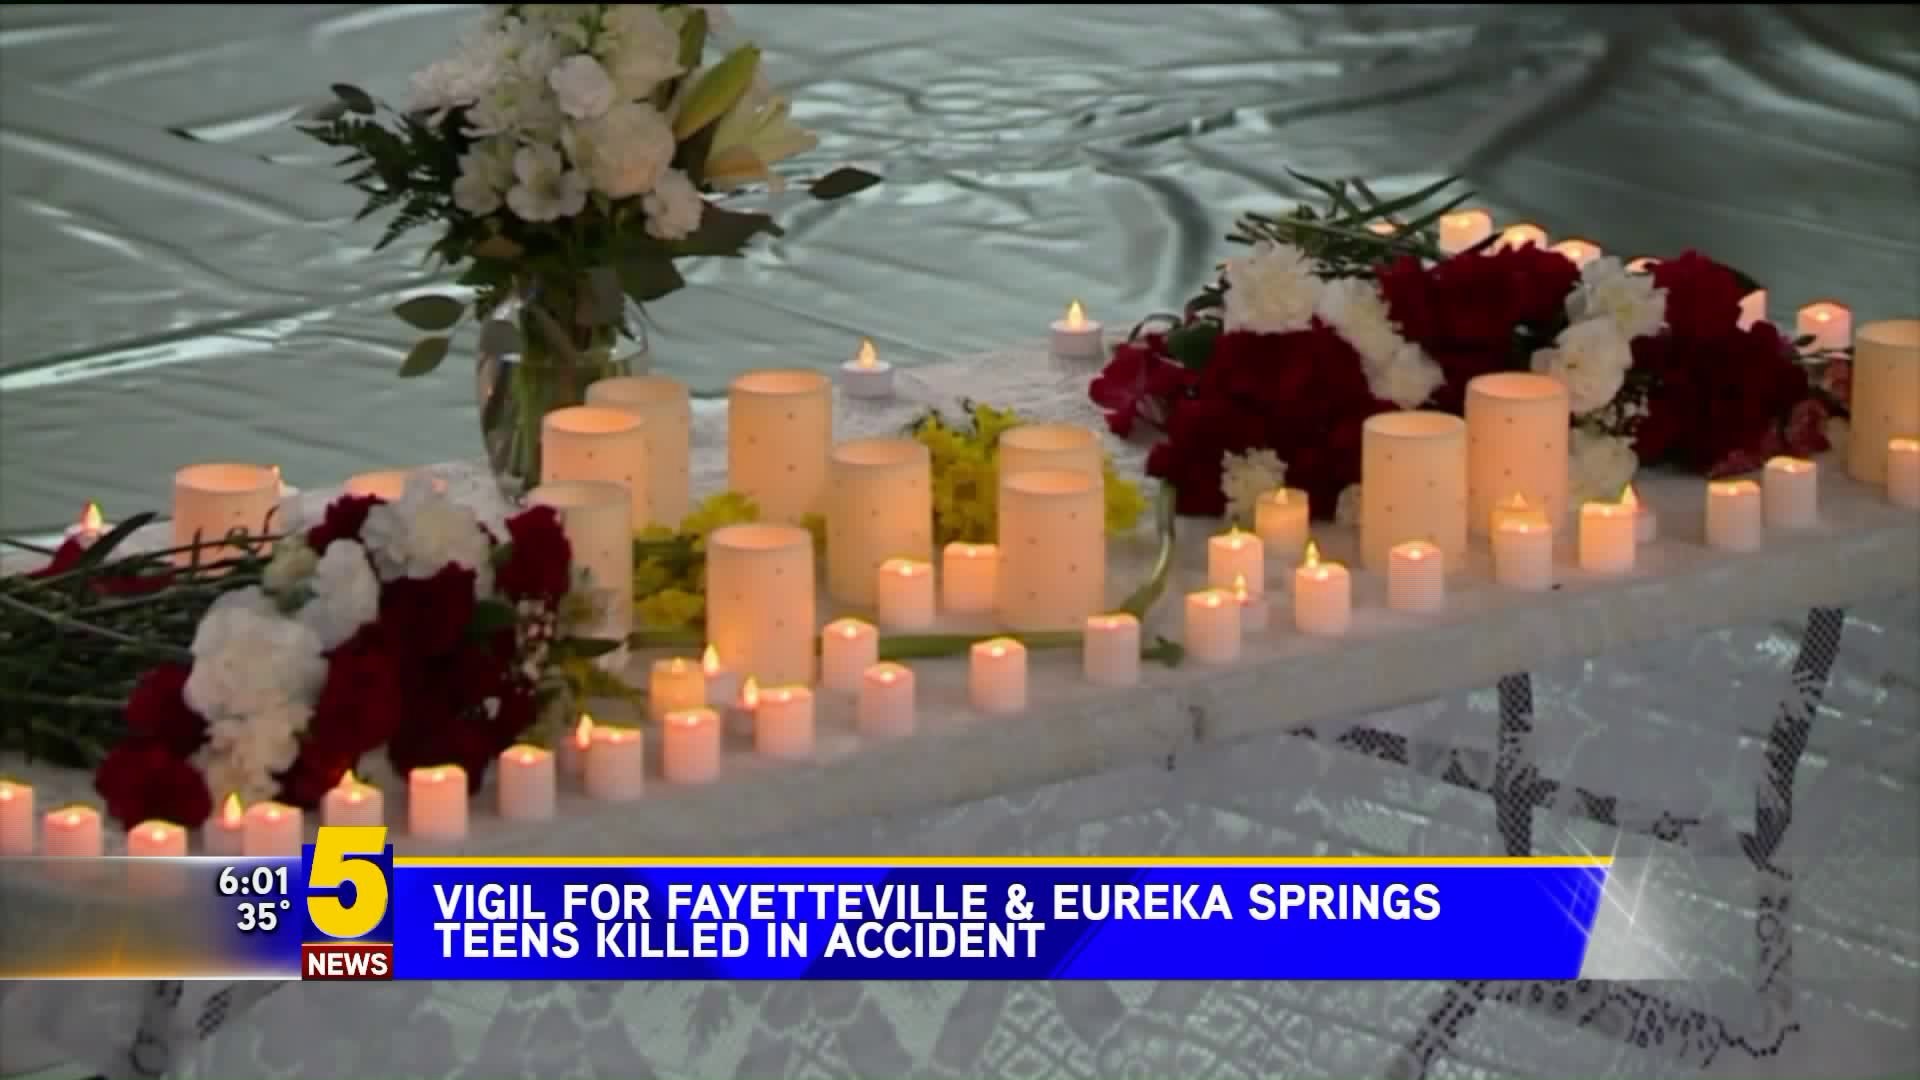 Vigil For Students Killed In Accident